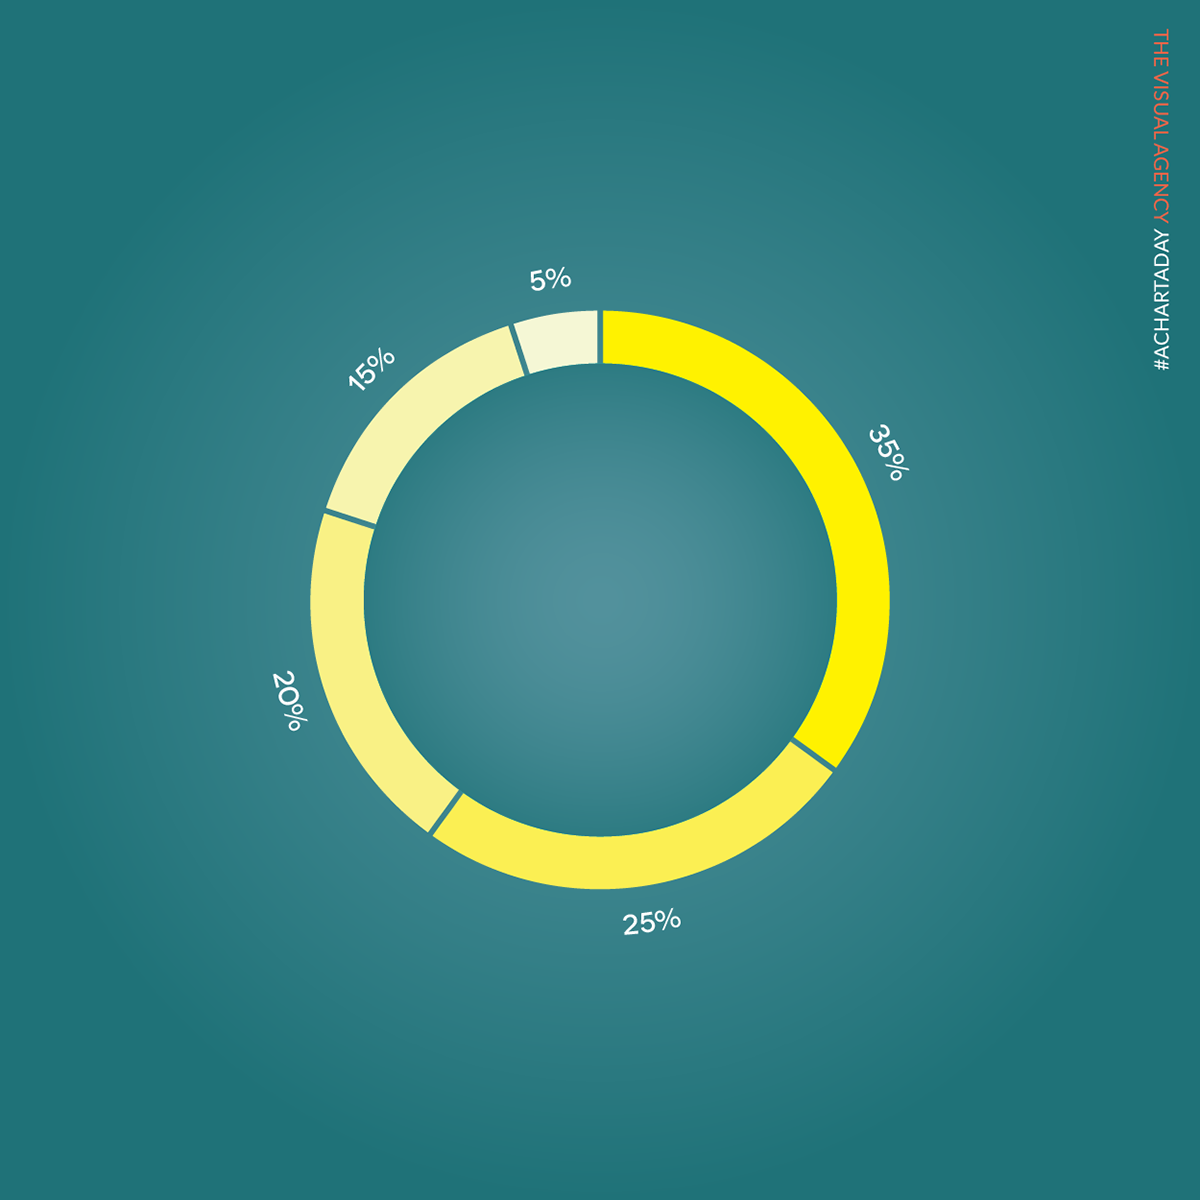 A CHART A DAY on Behance2bcd0352603575.5915d8e888659.png